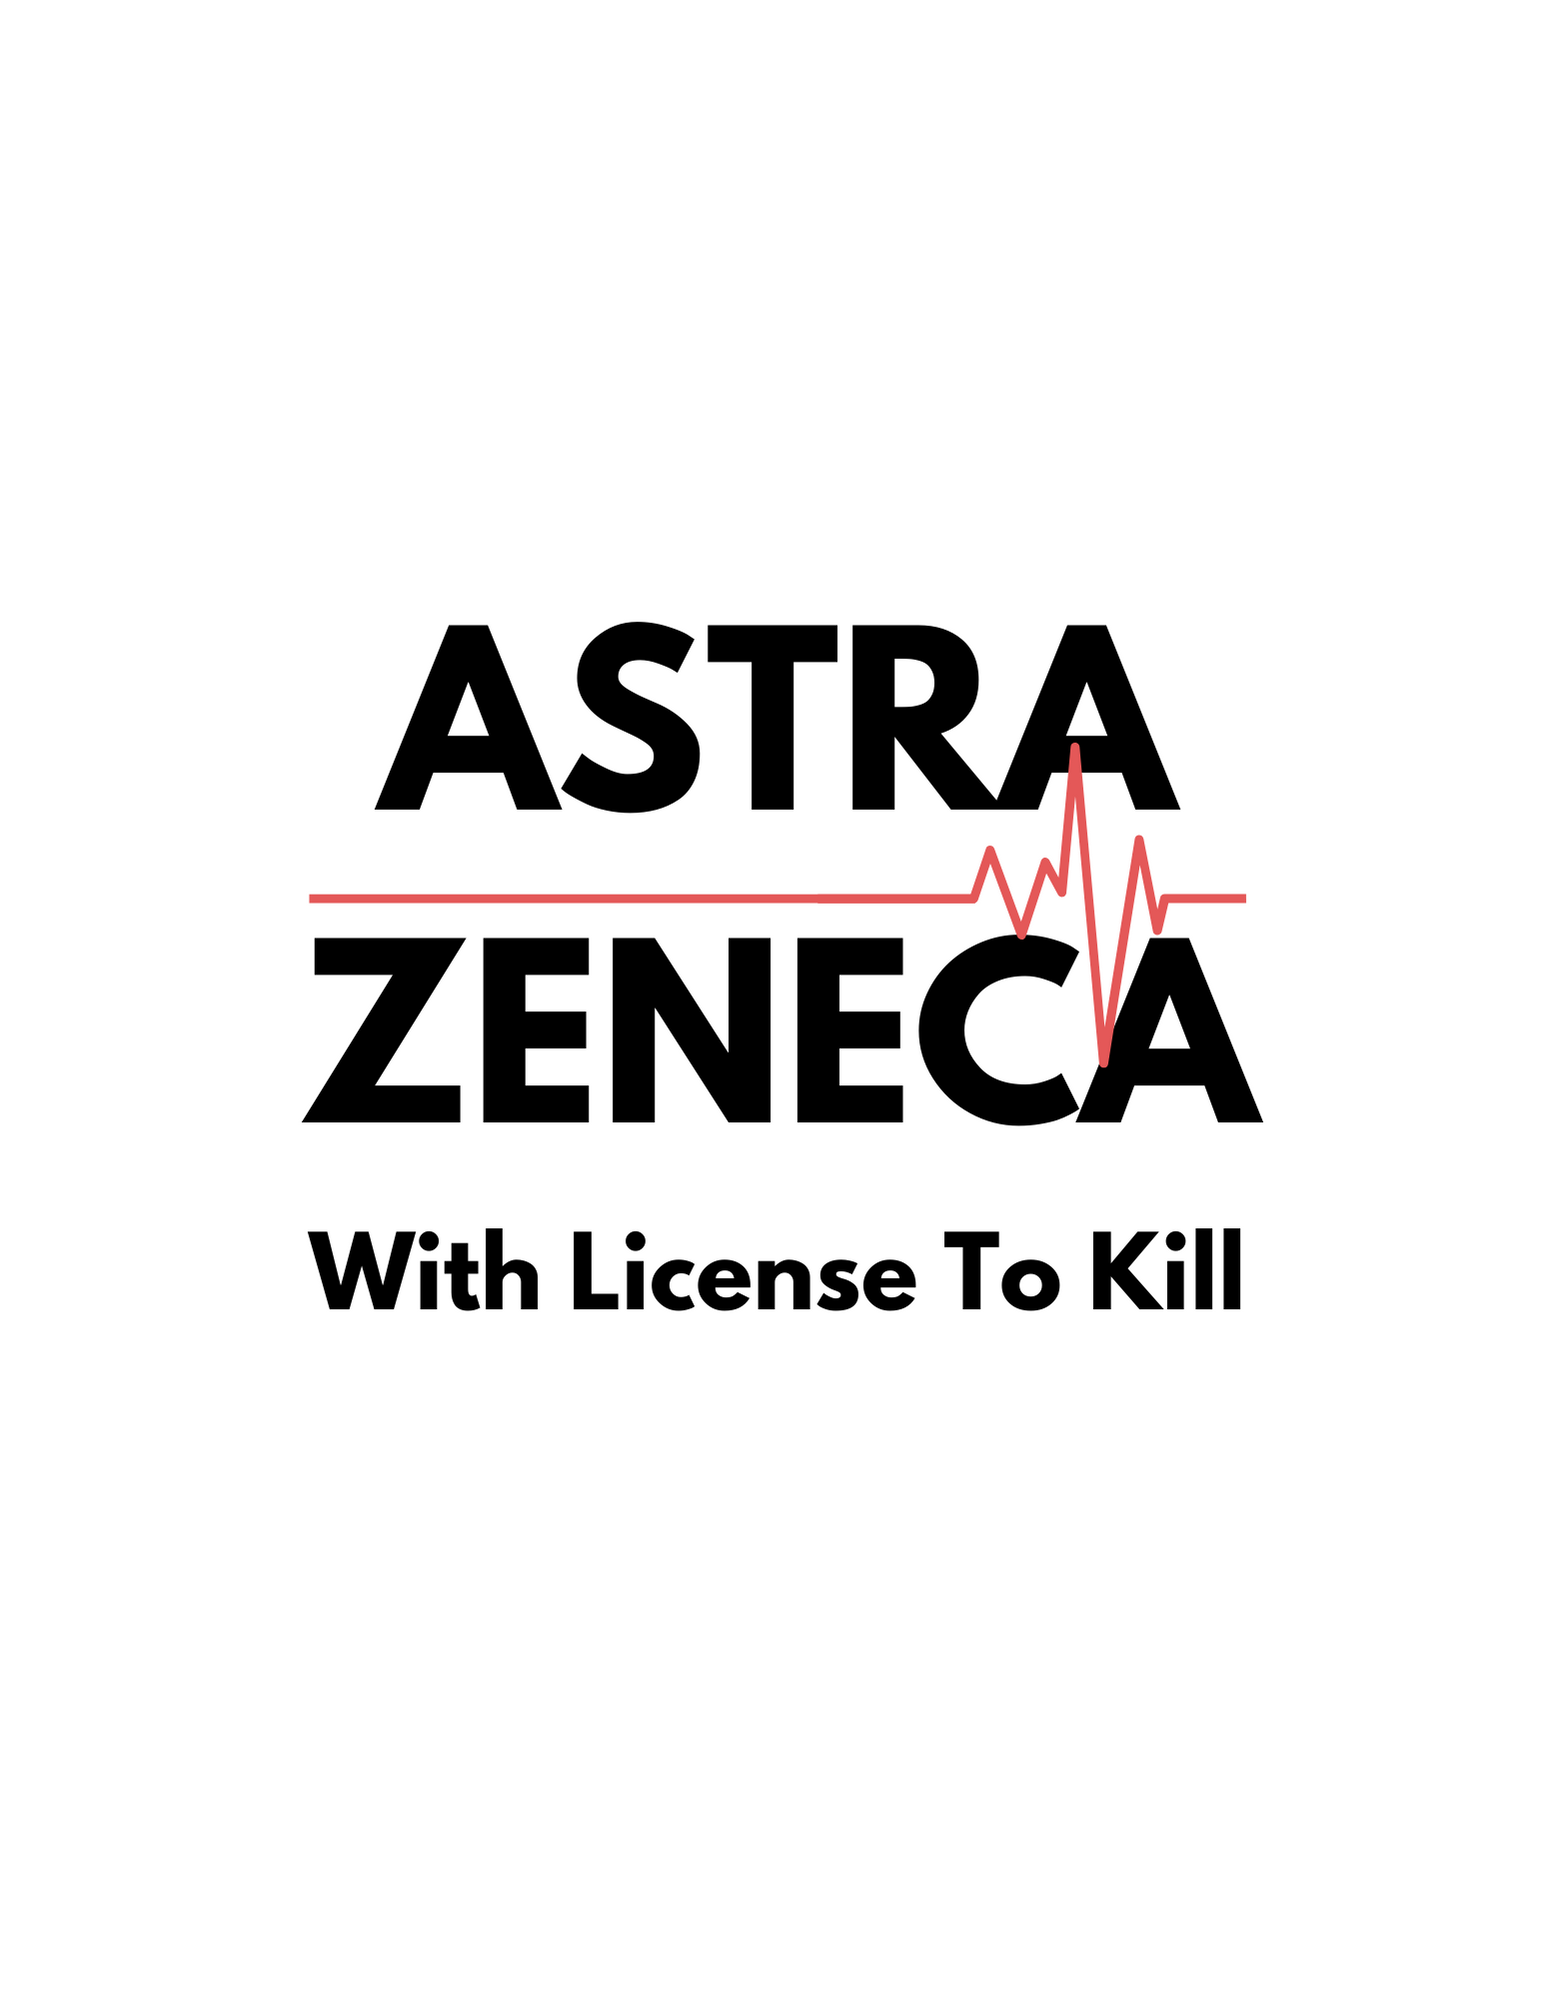 With License To Kill Sticker